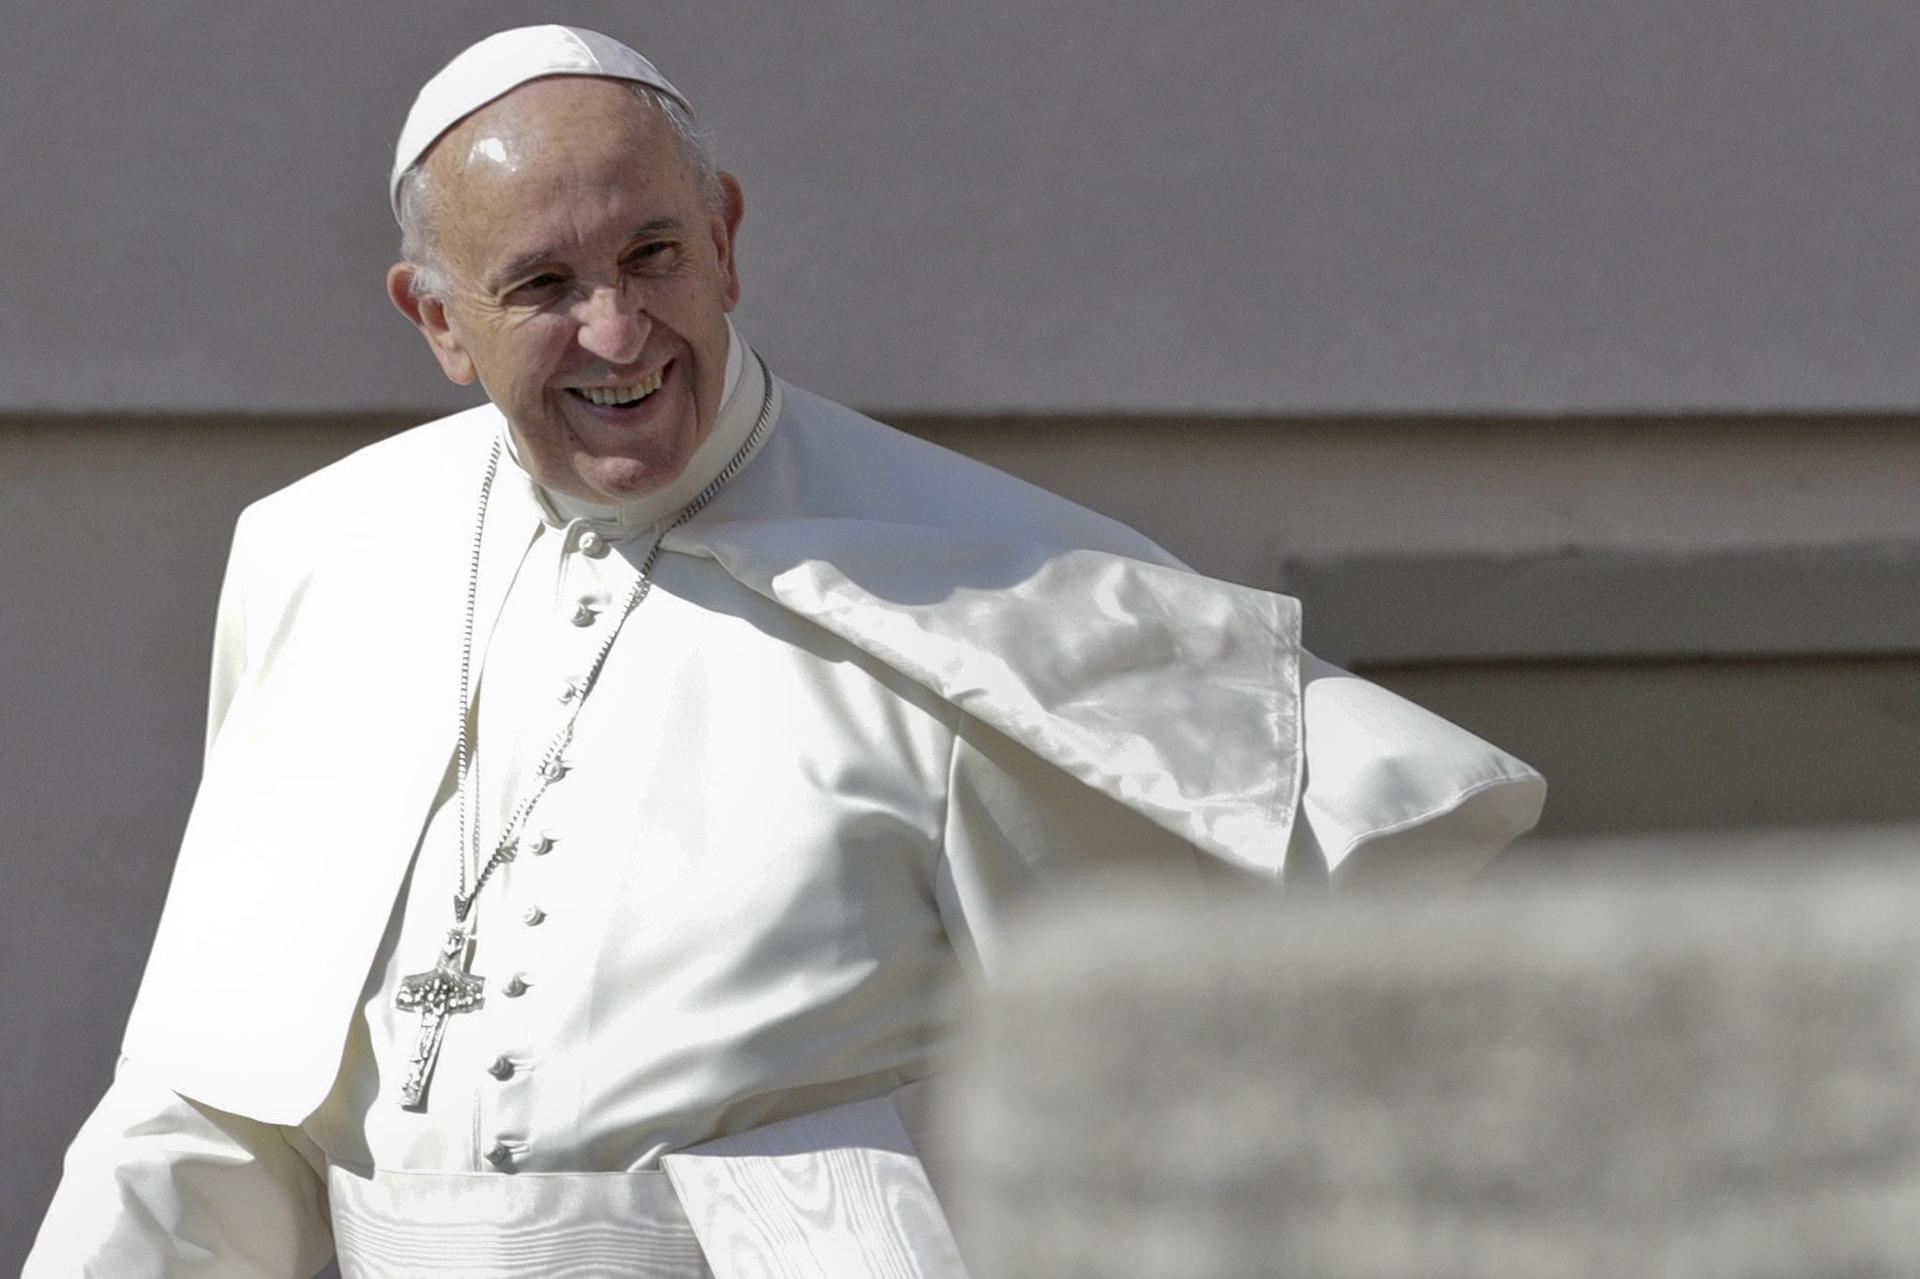 The Holy Spirit is our wind and hope is our sail, pope says